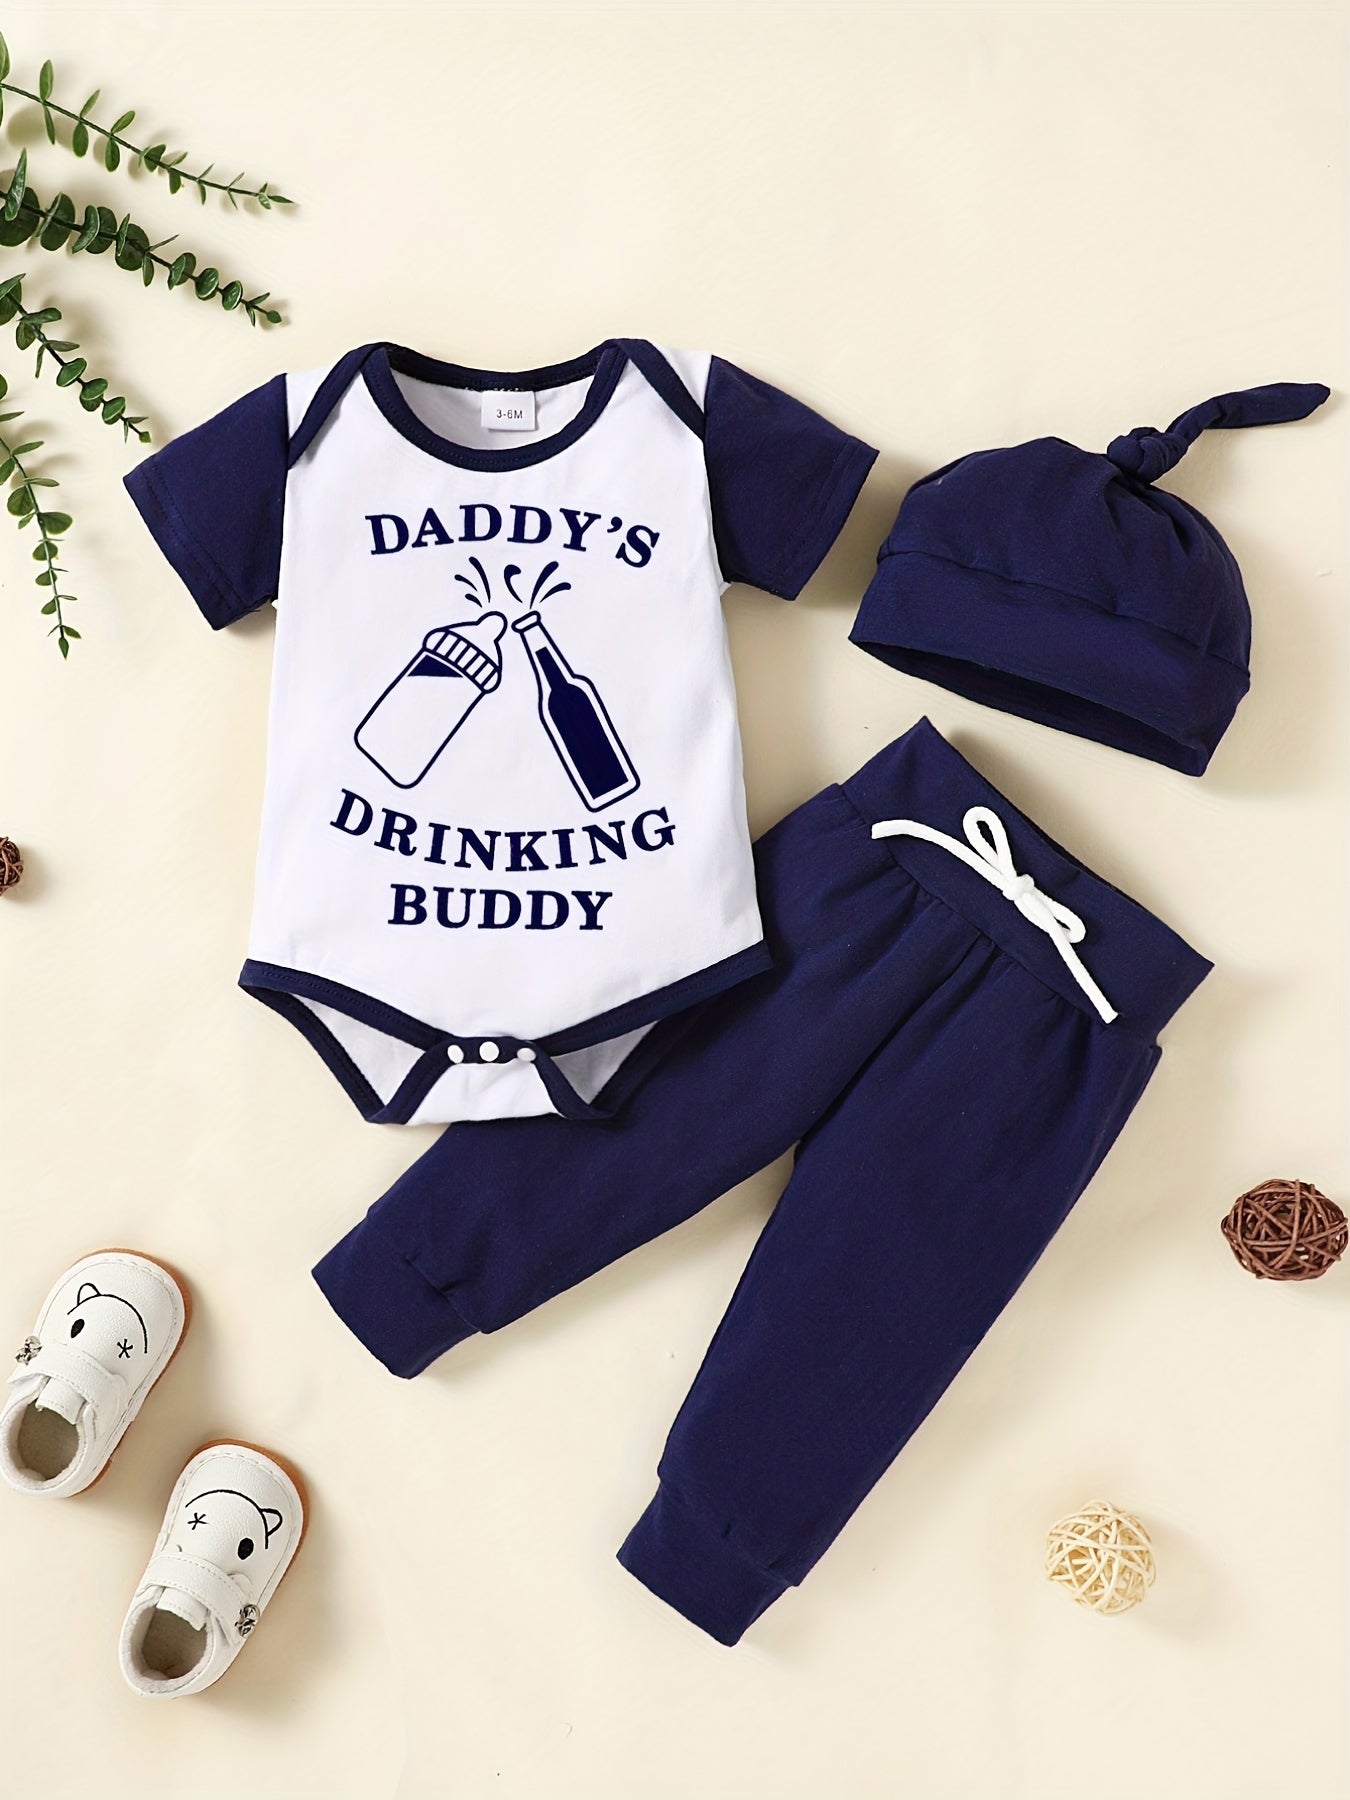 Cute & Casual "DADDY AND ME" Letter Print Outfit - Short Sleeve Onesie Romper & Pants & Hat Baby Boys Set